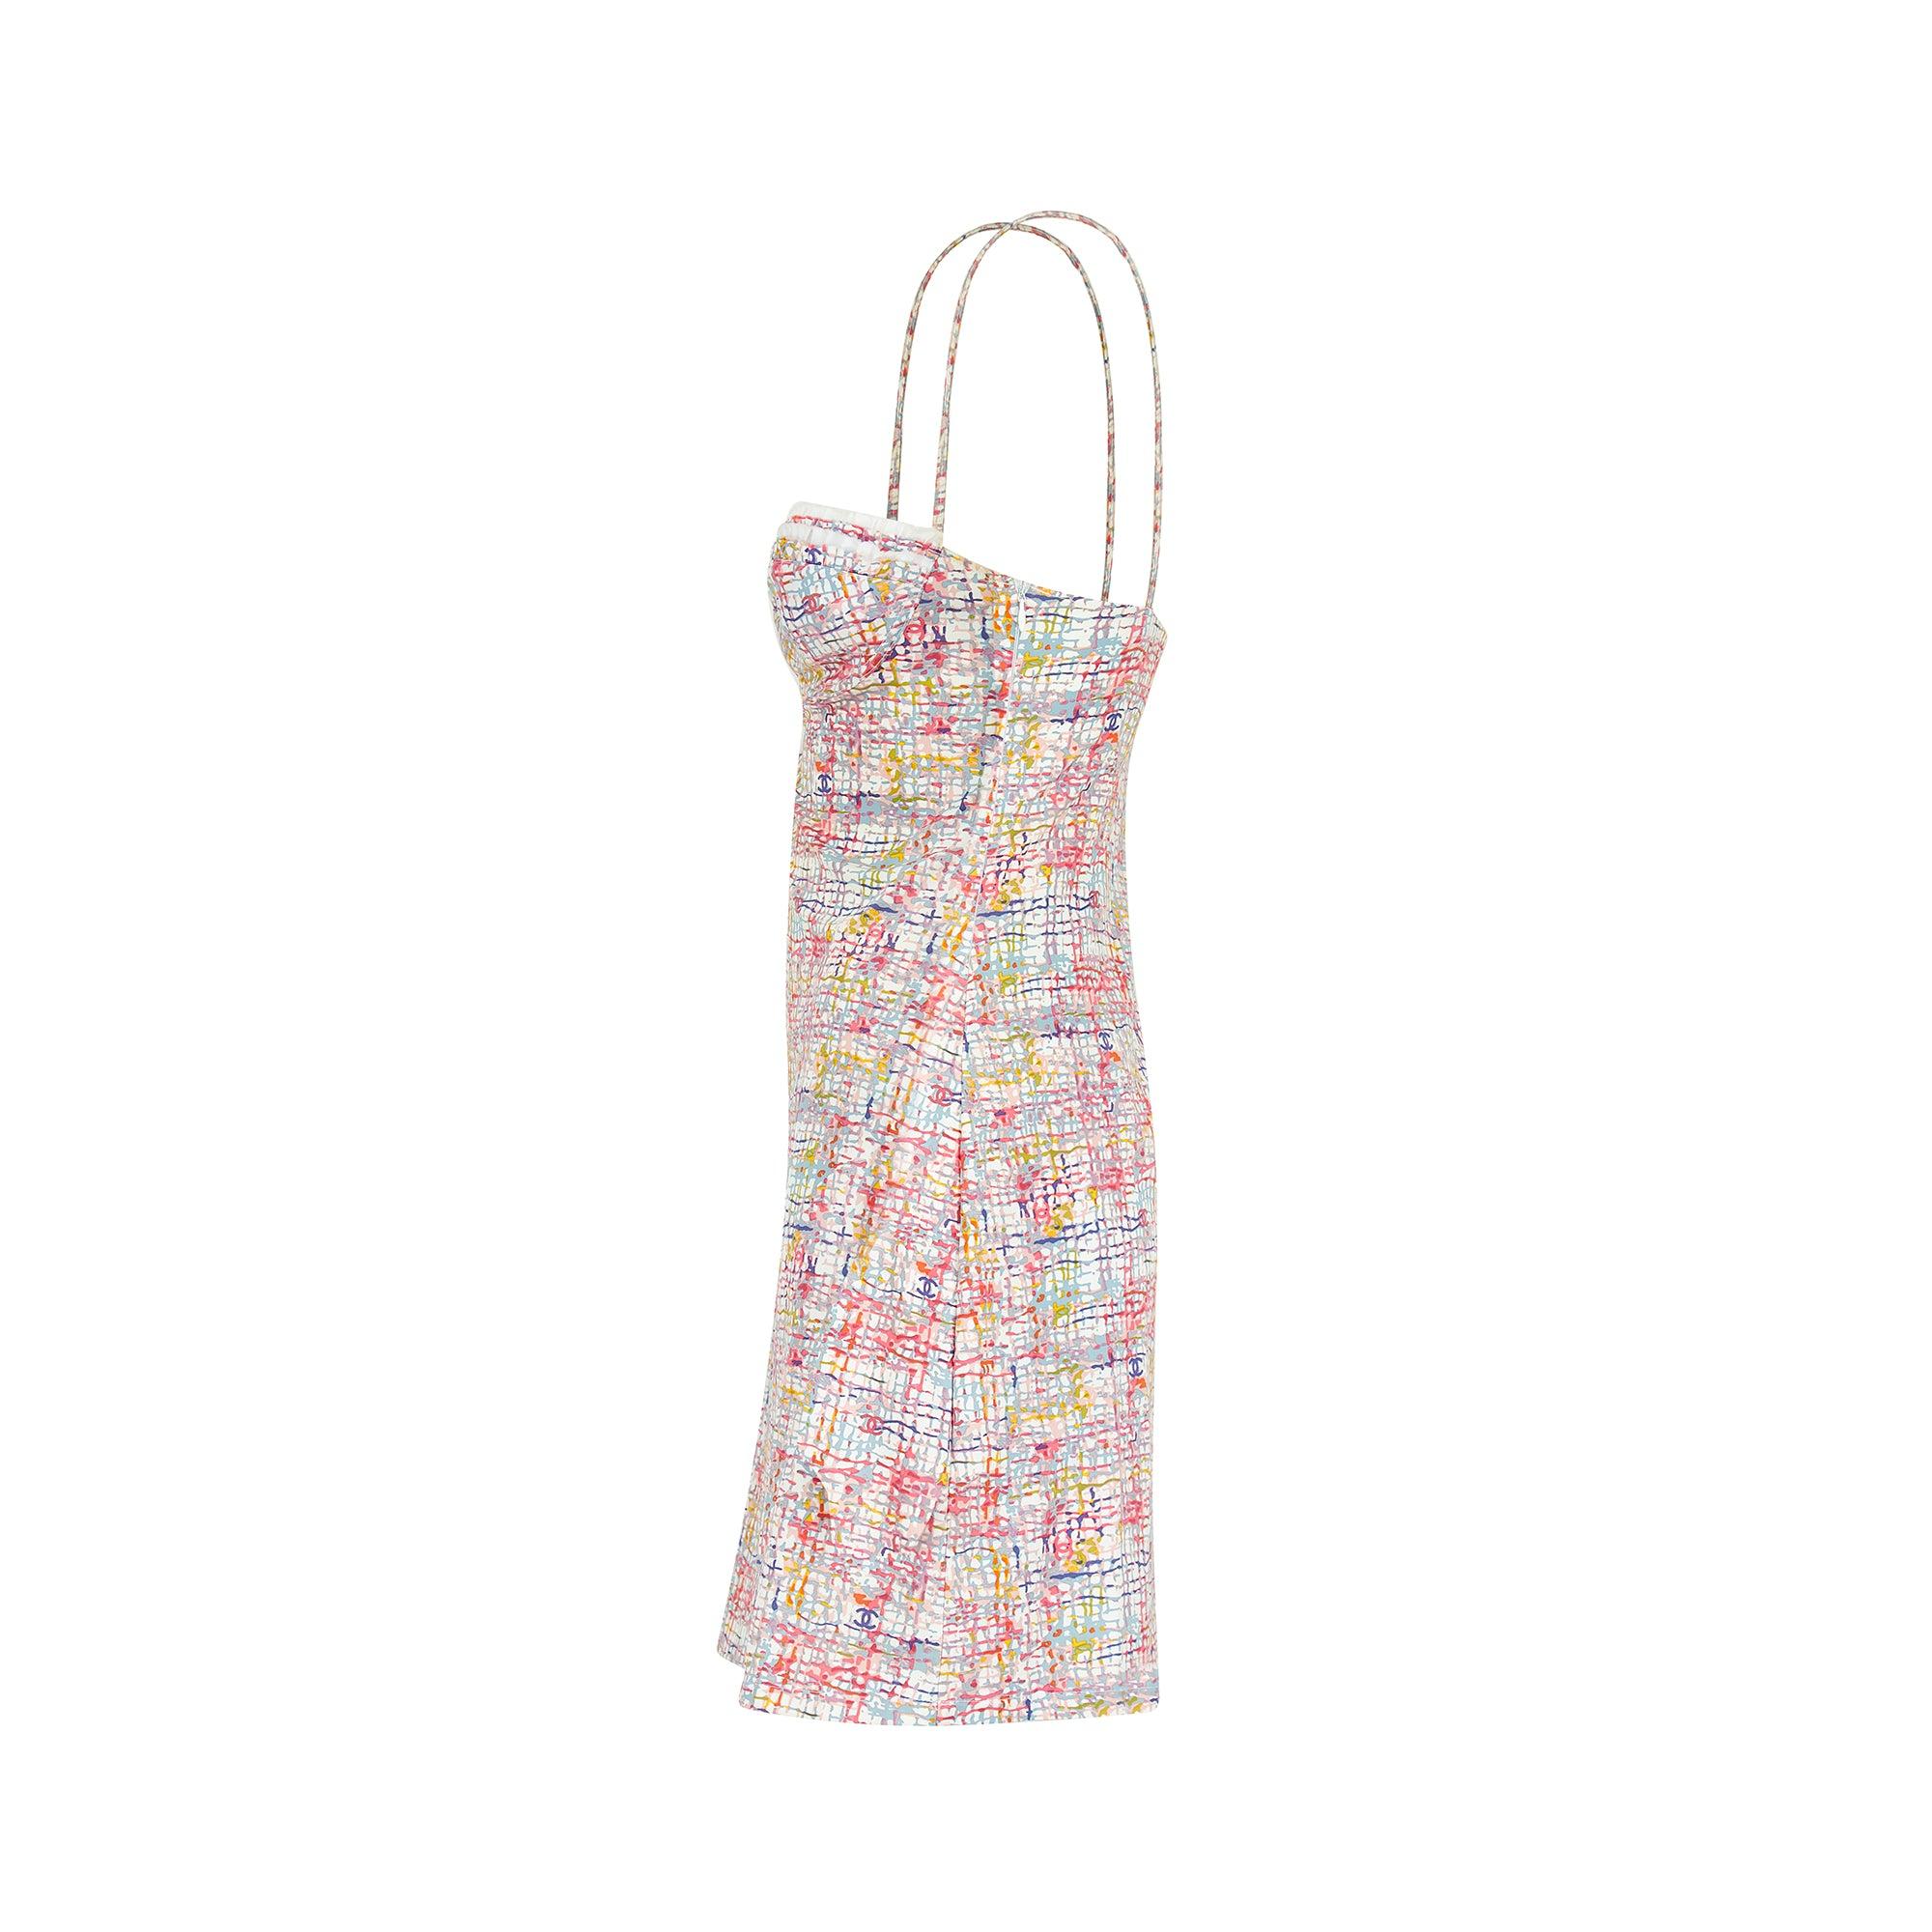 Reminiscent of 90's designs this dress is from Chanel’s 2005 Cruise collection. It would be hard to find a more iconic summer mini dress from the brand. Thin, elasticated spaghetti straps hold up a balconette top that is underwired, creating a